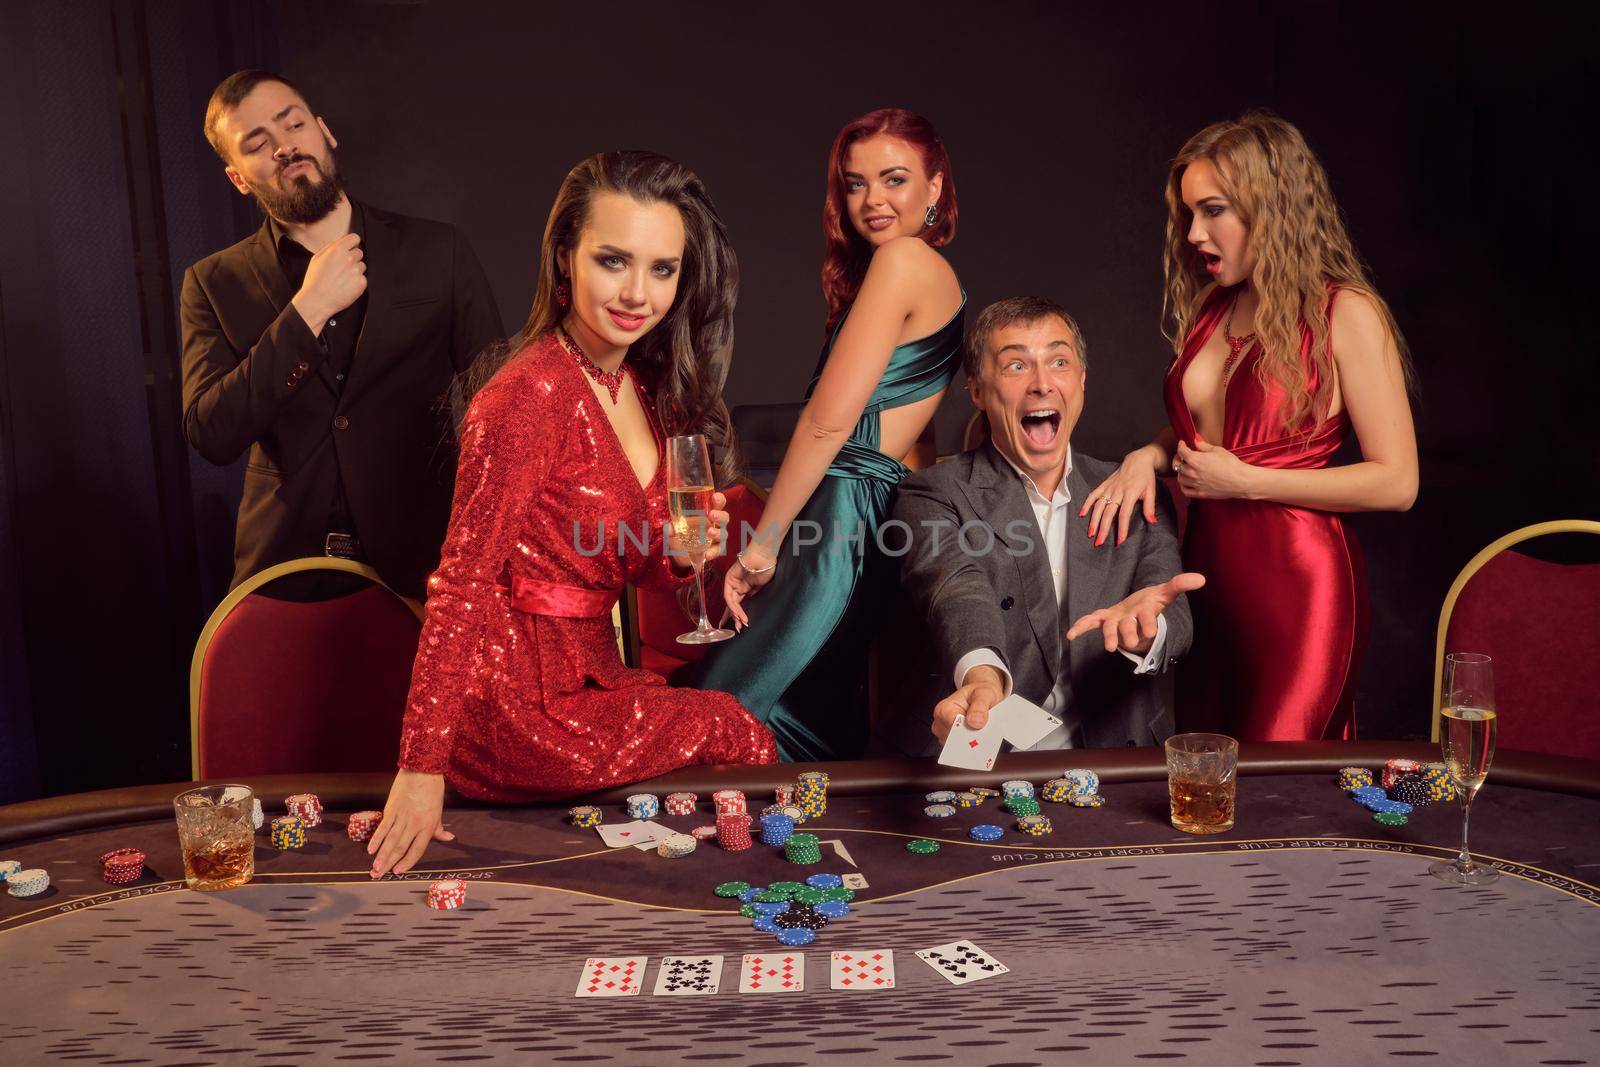 Joyful partners are playing poker at casino. They are celebrating their win, smiling and looking vey excited while posing at the table against a dark background. Cards, chips, money, alcohol, gambling, entertainment concept.